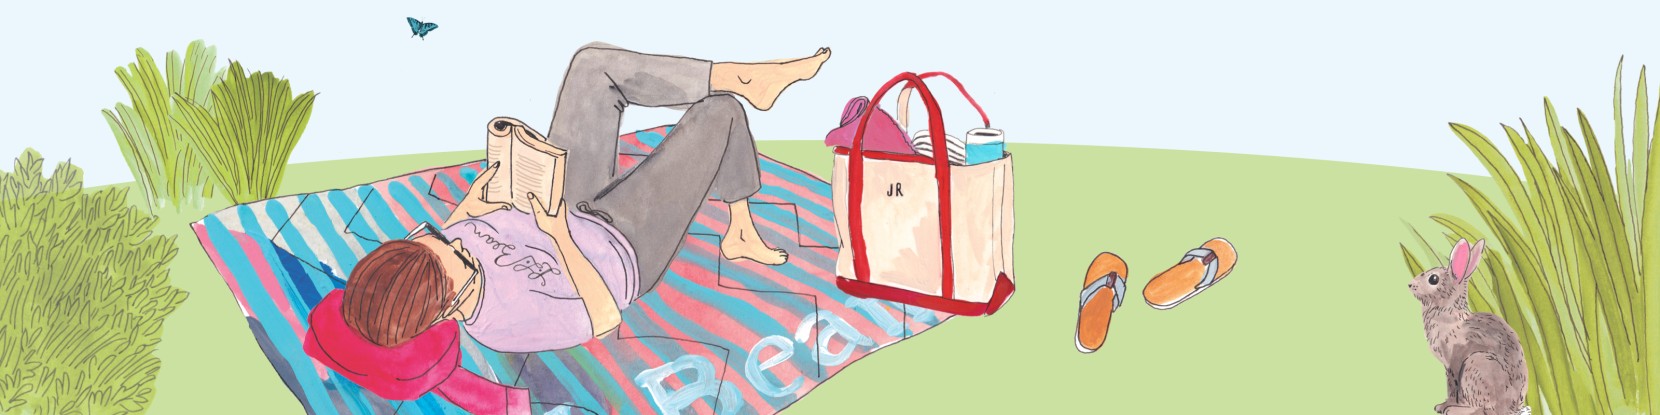 Illustration of a woman outside lying on a blanket reading, a full Boat & Tote beside her and a rabbit in the grass nearby.